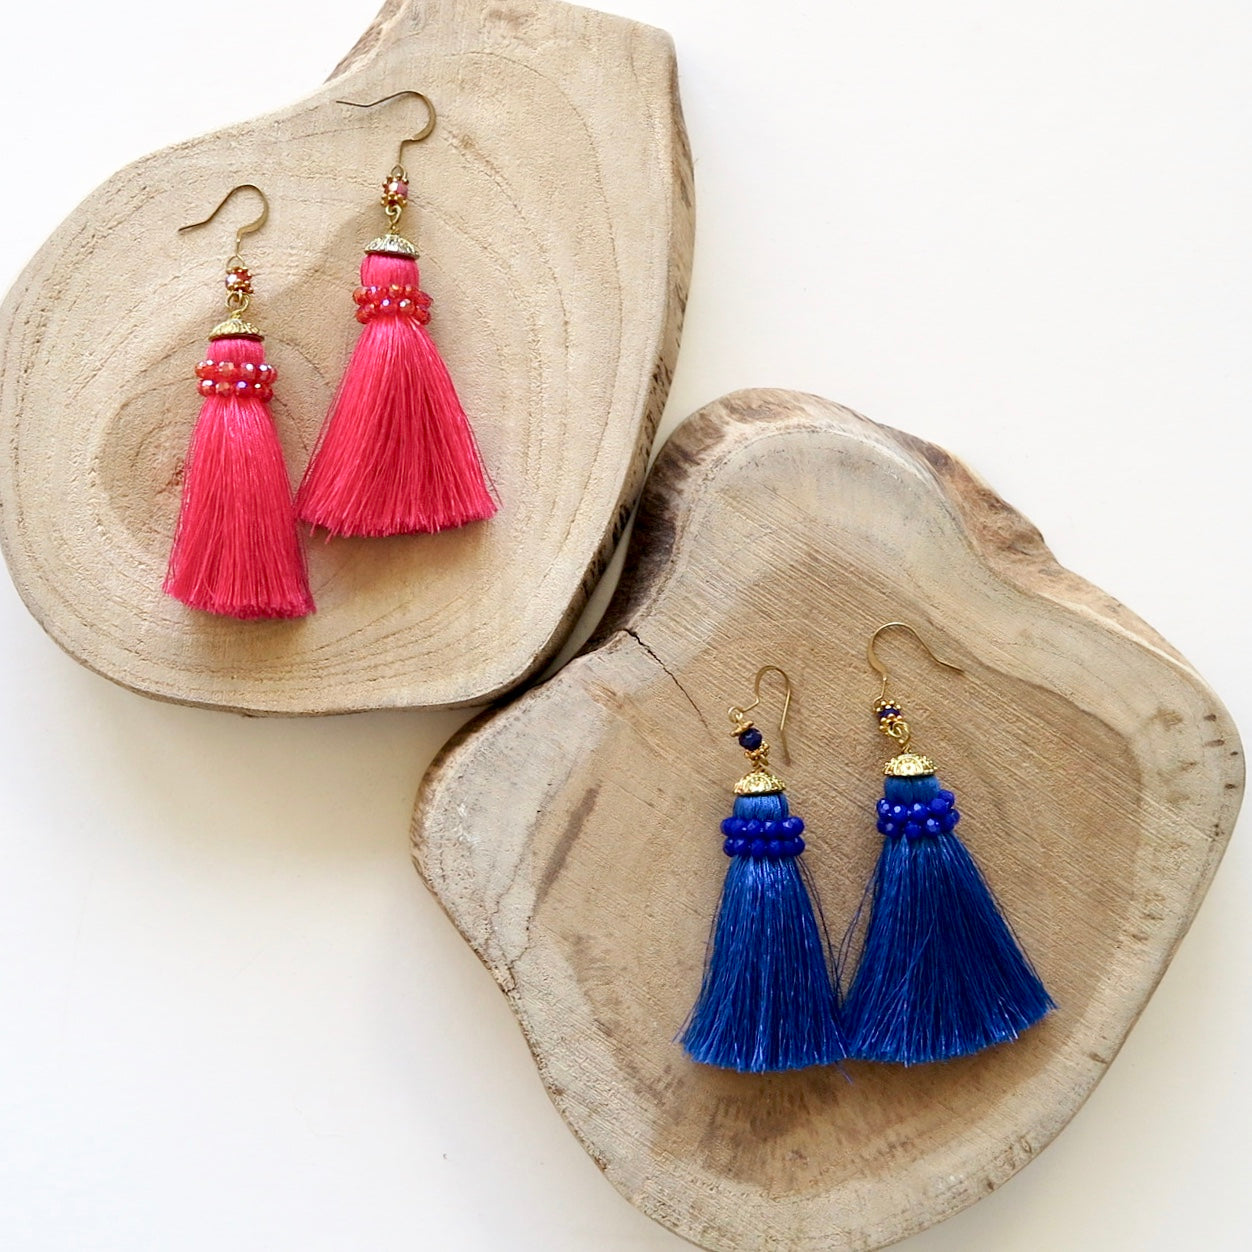 DIY Tinsel Tassel Earrings for Some Sparkle in an Instant!